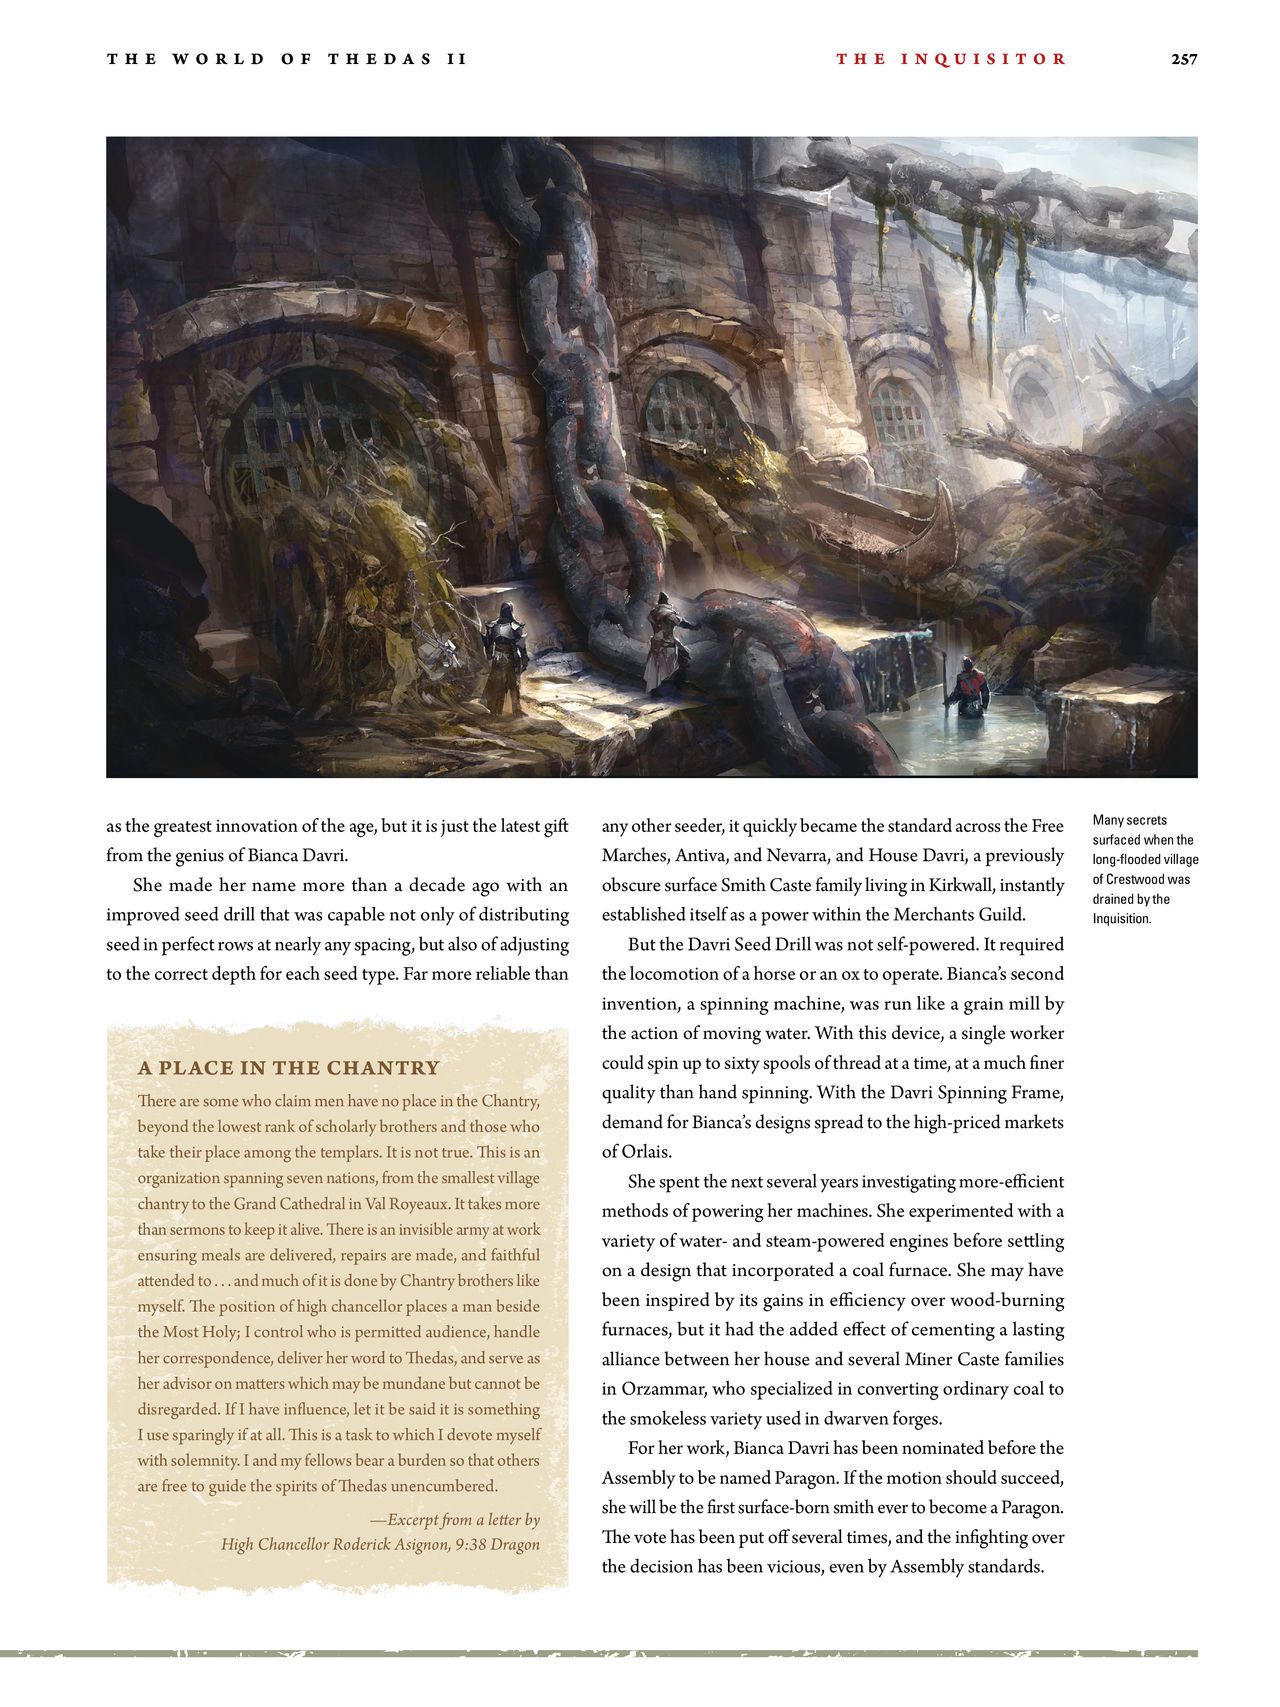 Dragon Age - The World of Thedas v02 250